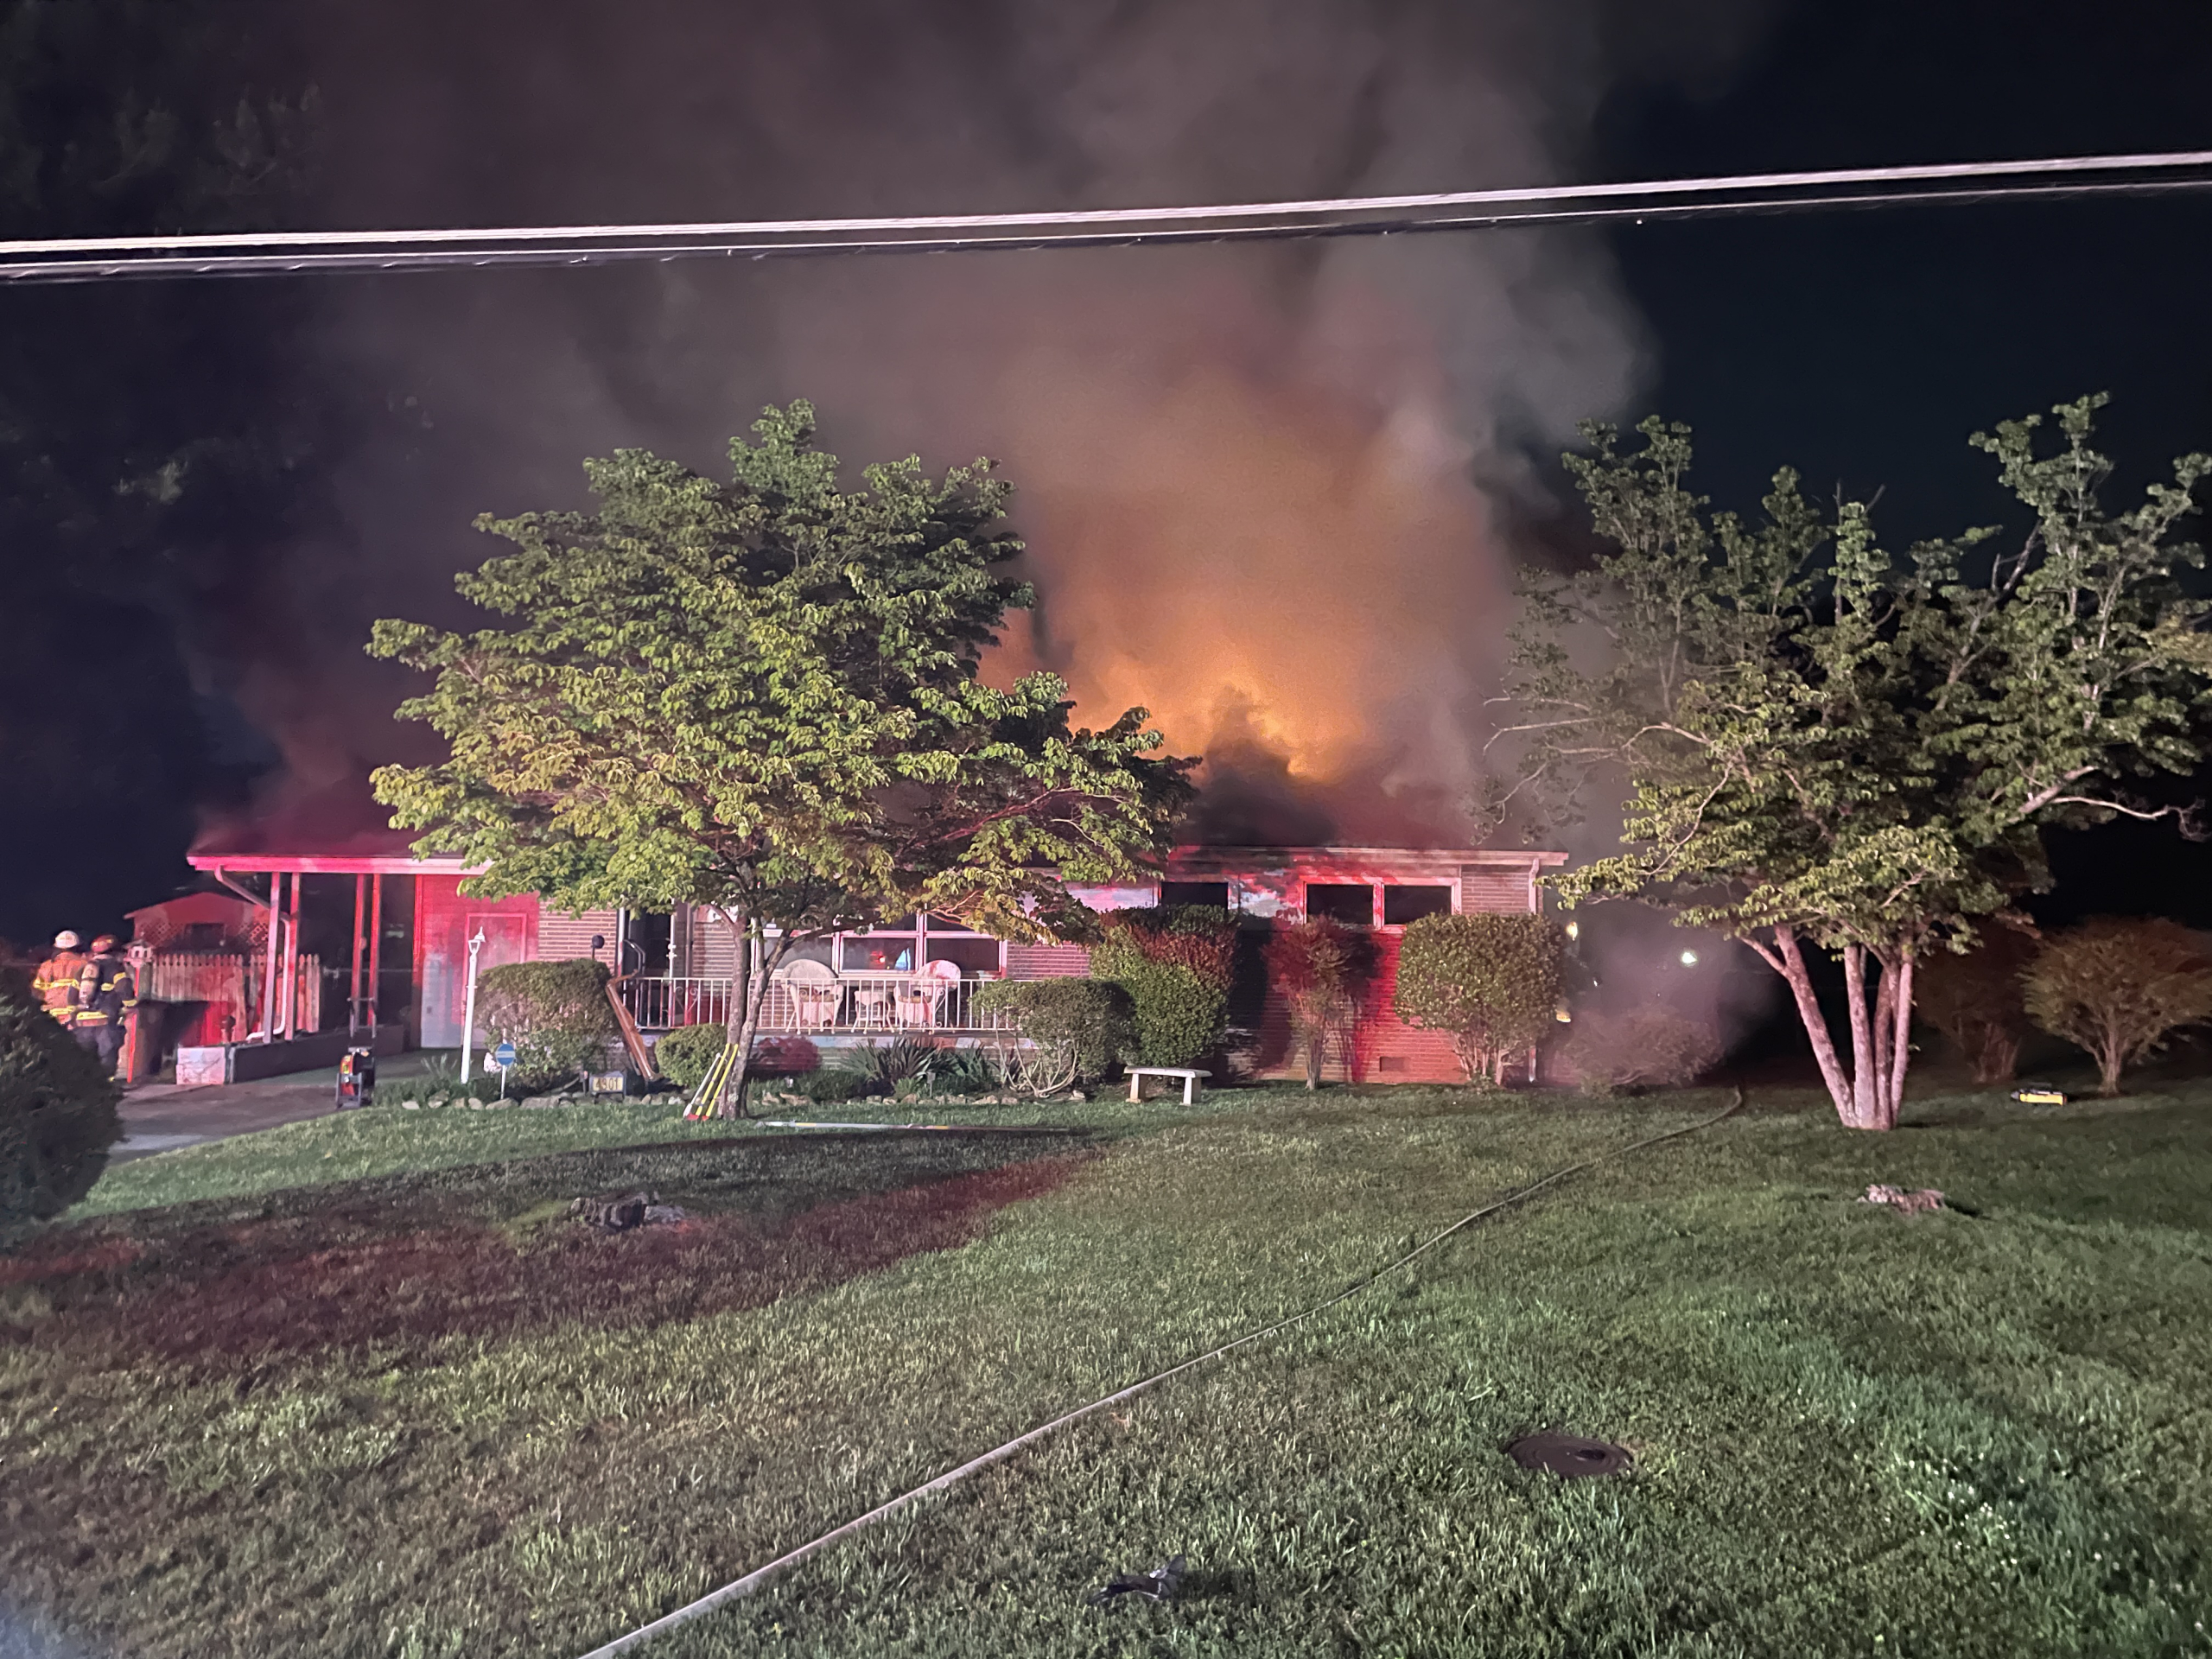 An Investigation is Underway Following a Fatal House Fire in Northwest Knoxville